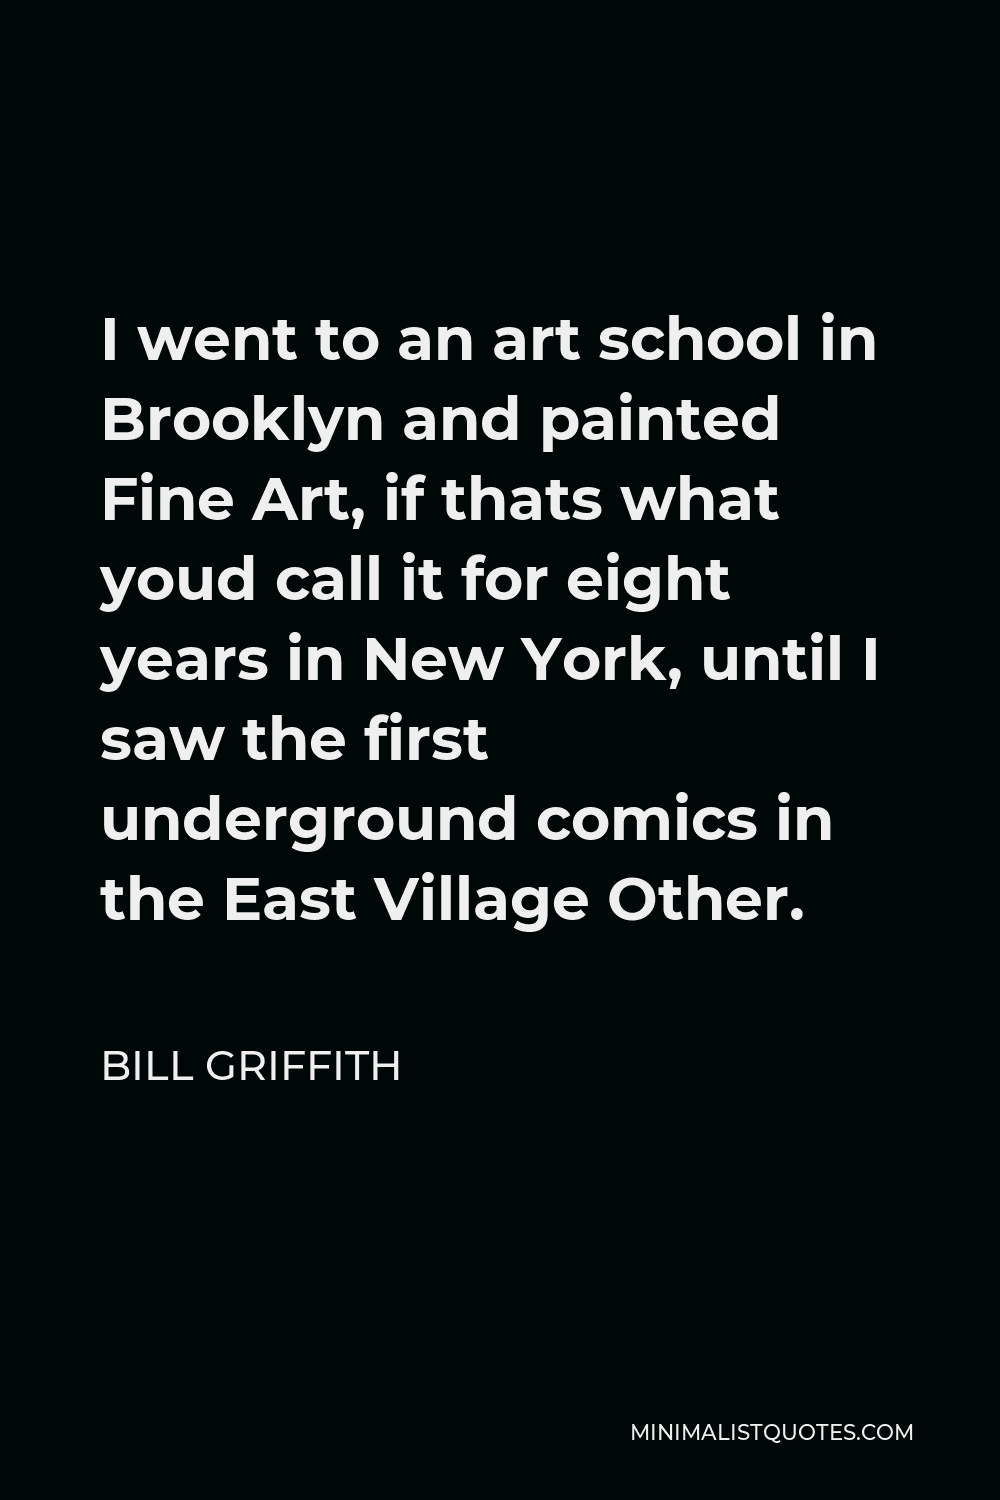 Bill Griffith Quote - I went to an art school in Brooklyn and painted Fine Art, if thats what youd call it for eight years in New York, until I saw the first underground comics in the East Village Other.